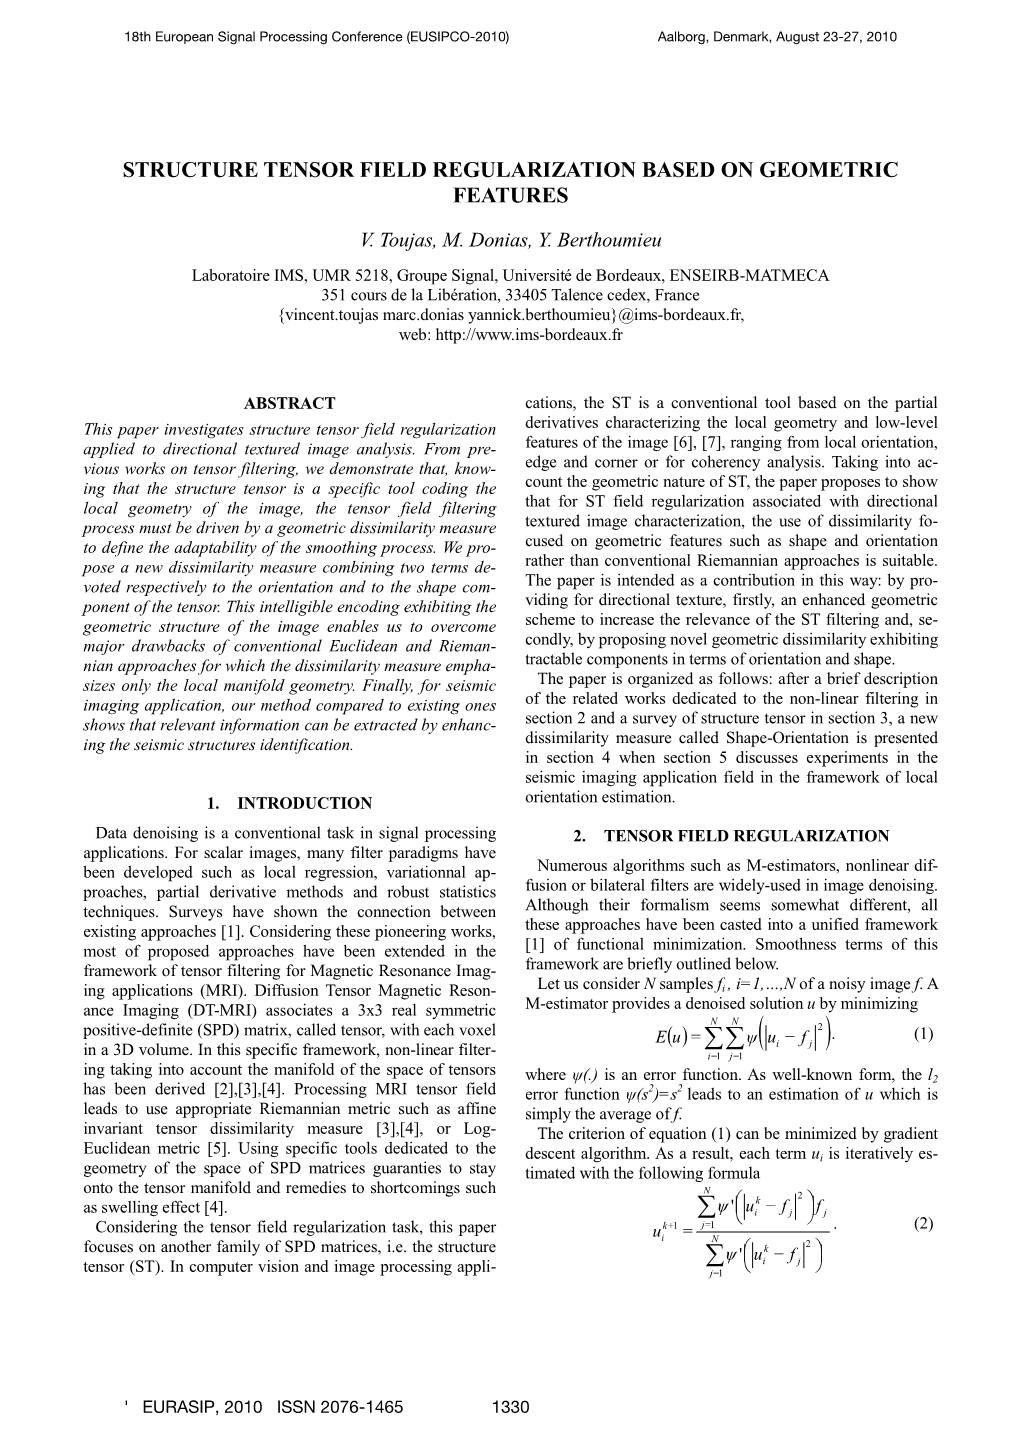 Structure Tensor Field Regularization Based on Geometric Features